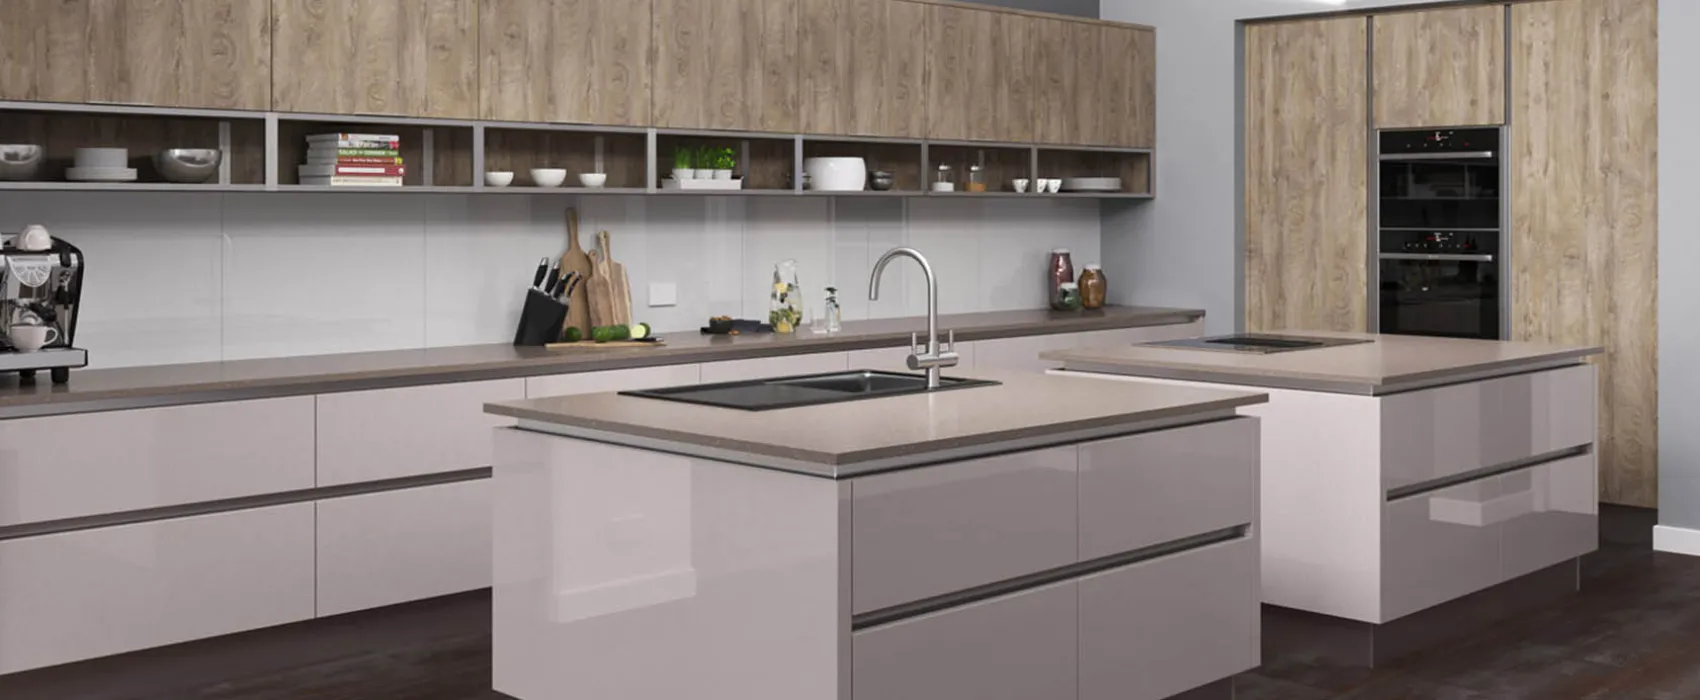 CROWN IMPERIAL KITCHENS 